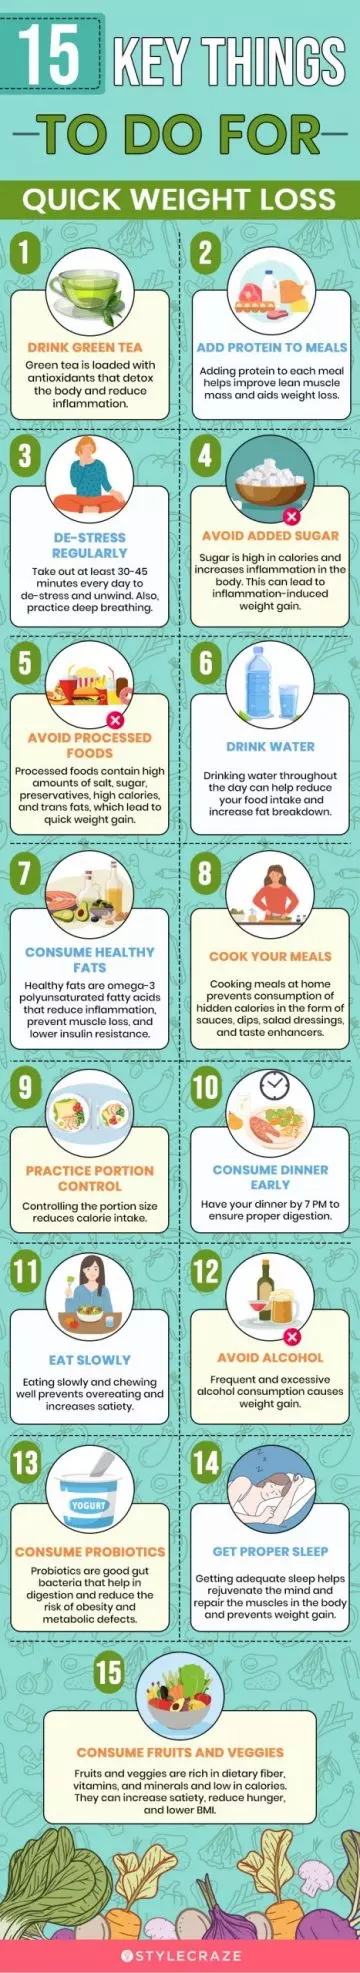 15 key things to do for quick weight loss (infographic)